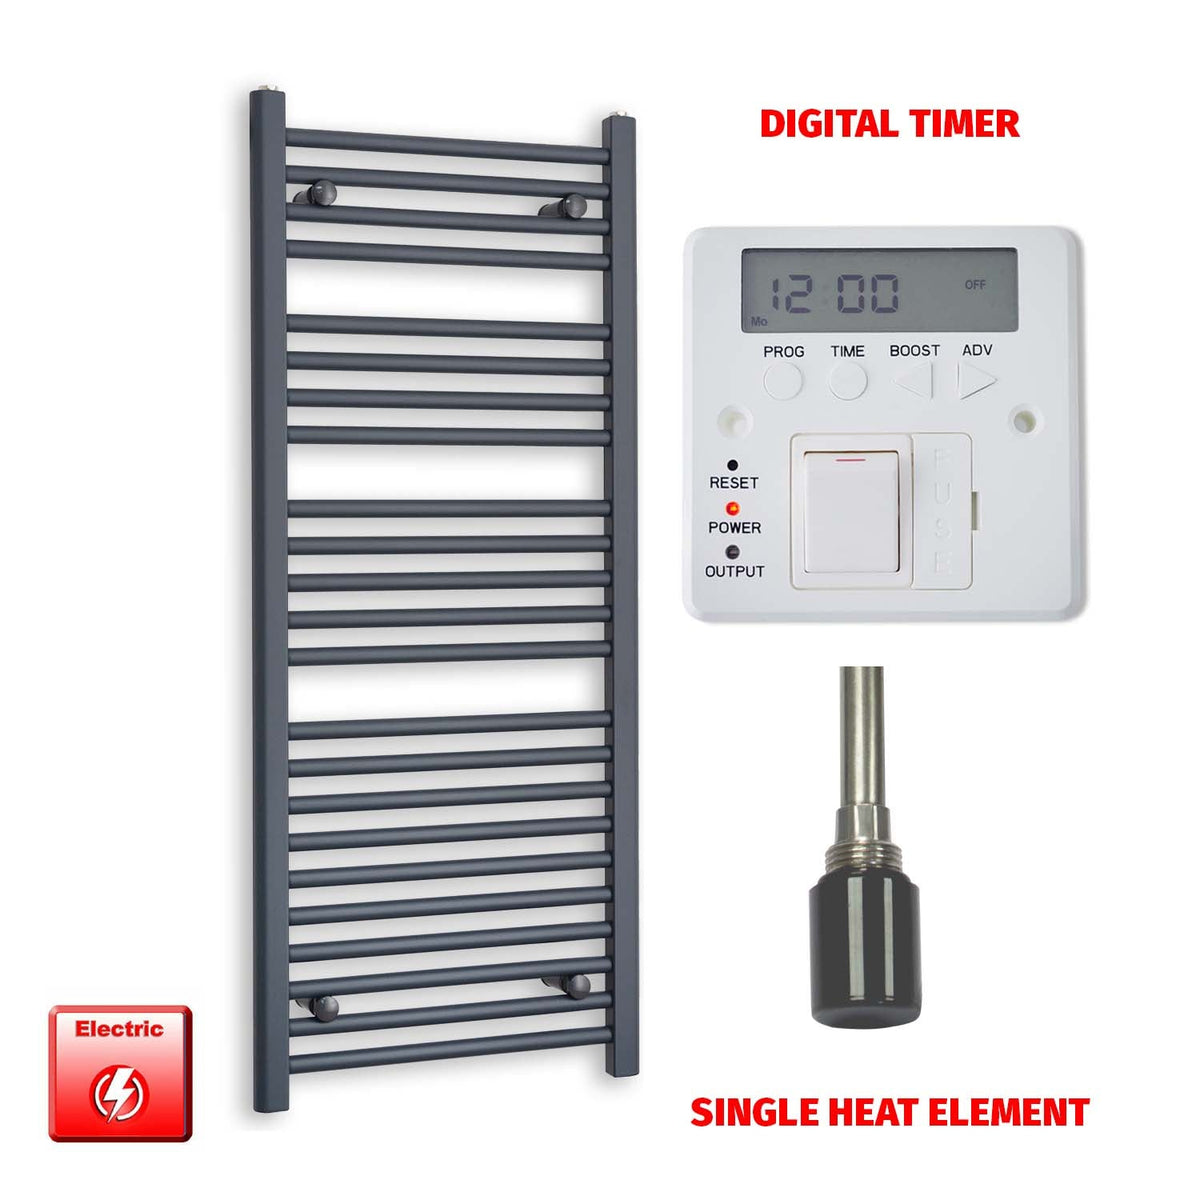 1200mm High 500mm Wide Flat Anthracite Pre-Filled Electric Heated Towel Rail Radiator HTR Single heat element Digital timer